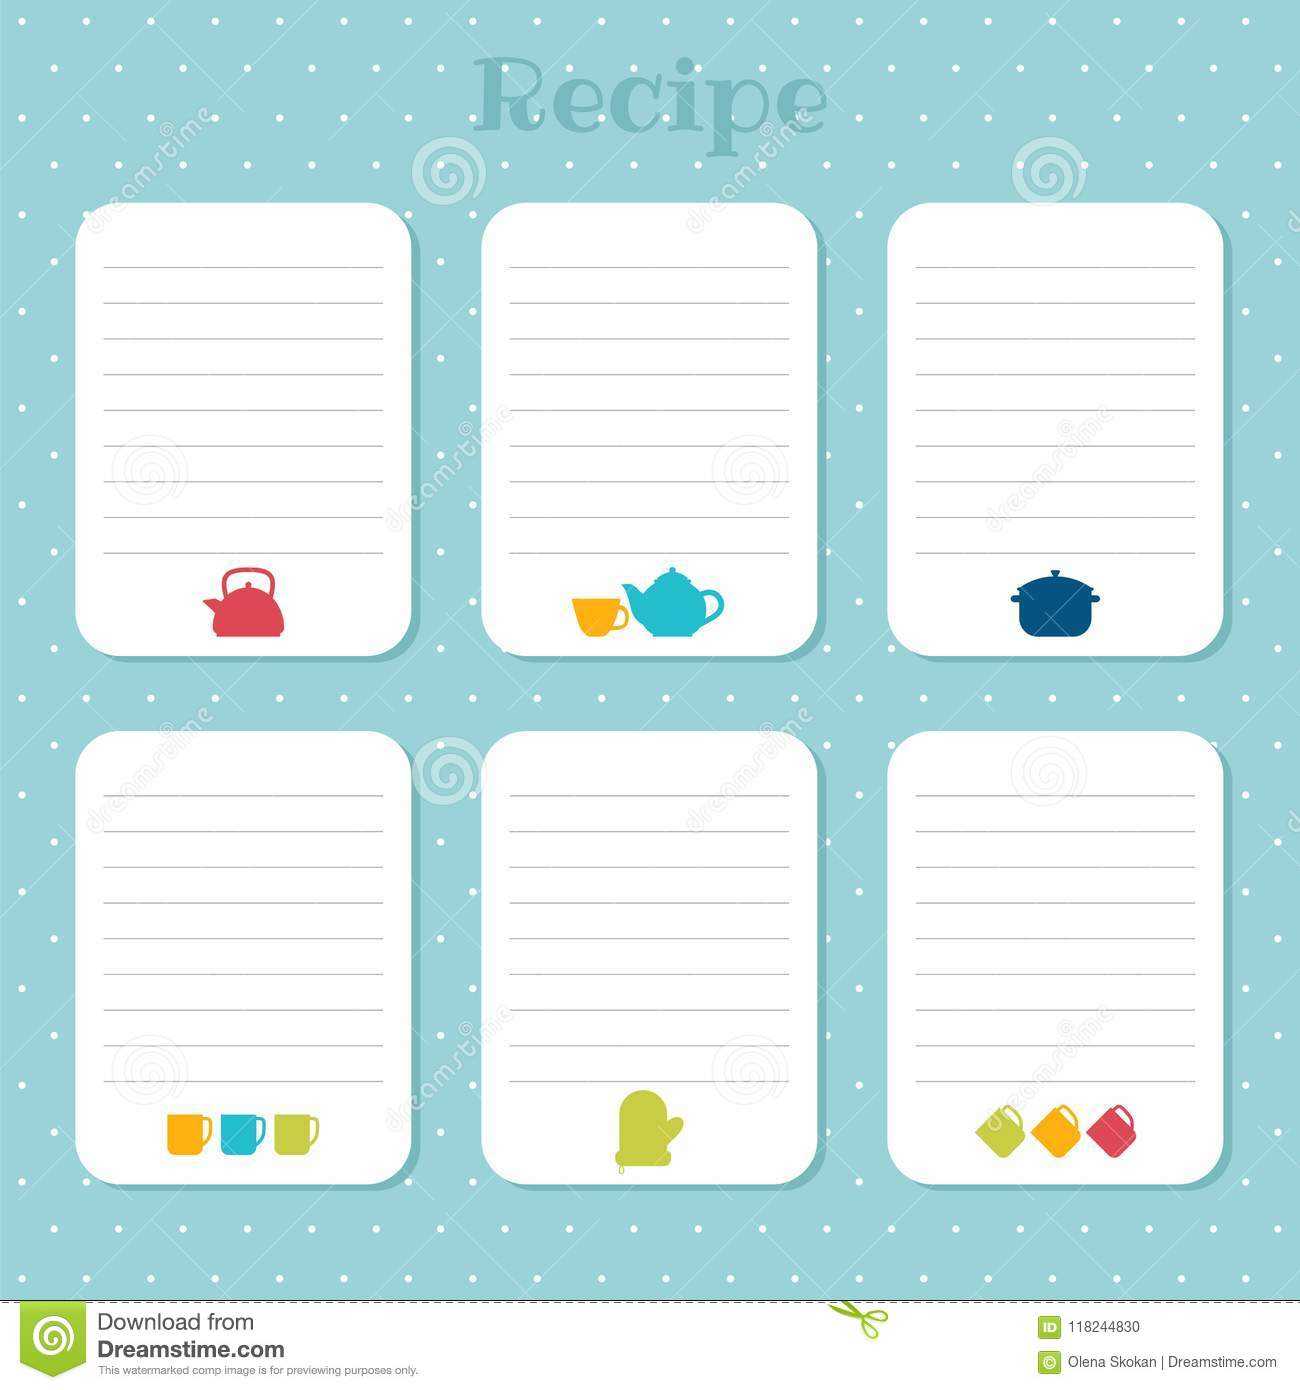 Recipe Cards Set. Cooking Card Templates. For Restaurant In Restaurant Recipe Card Template